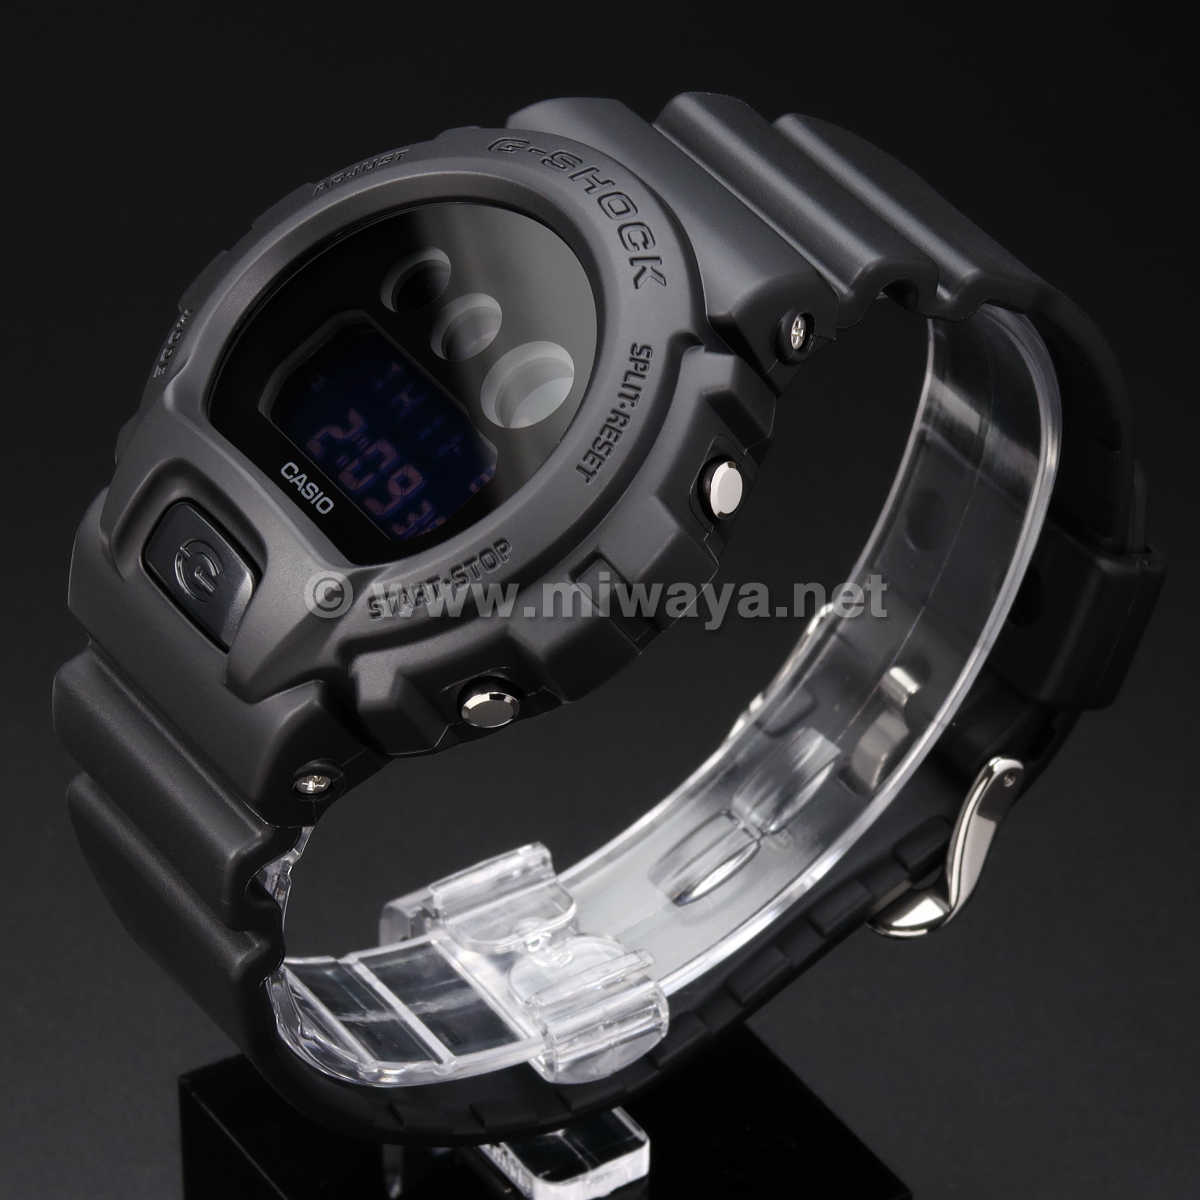 【G-SHOCK】DW-6900BBA-1JF